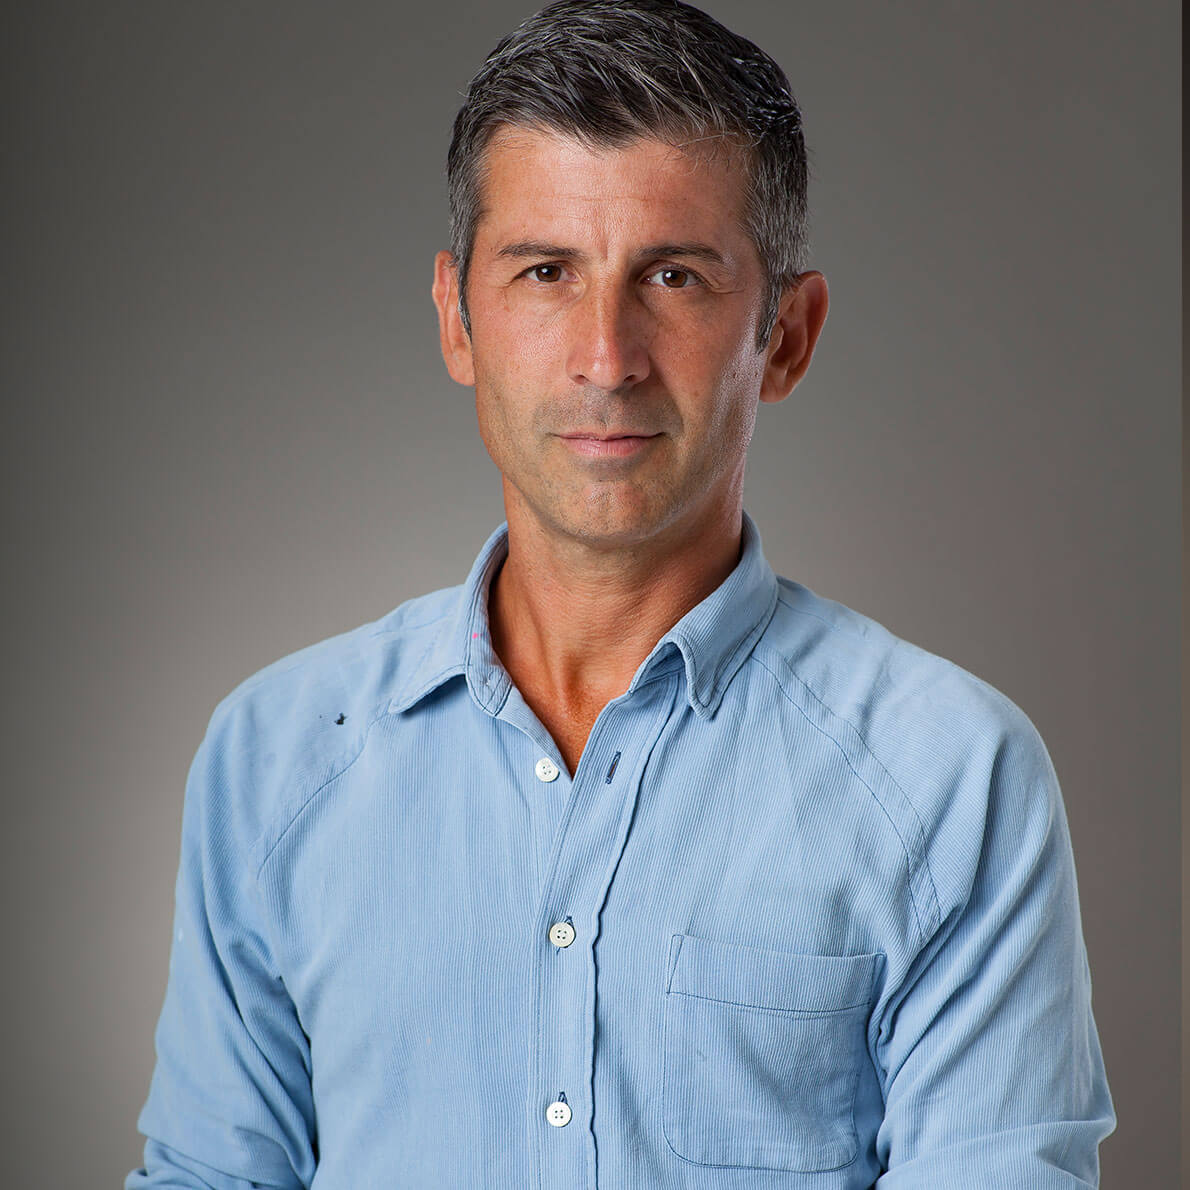 A portrait of a middle-aged man wearing a denim shirt in front of a grey background.